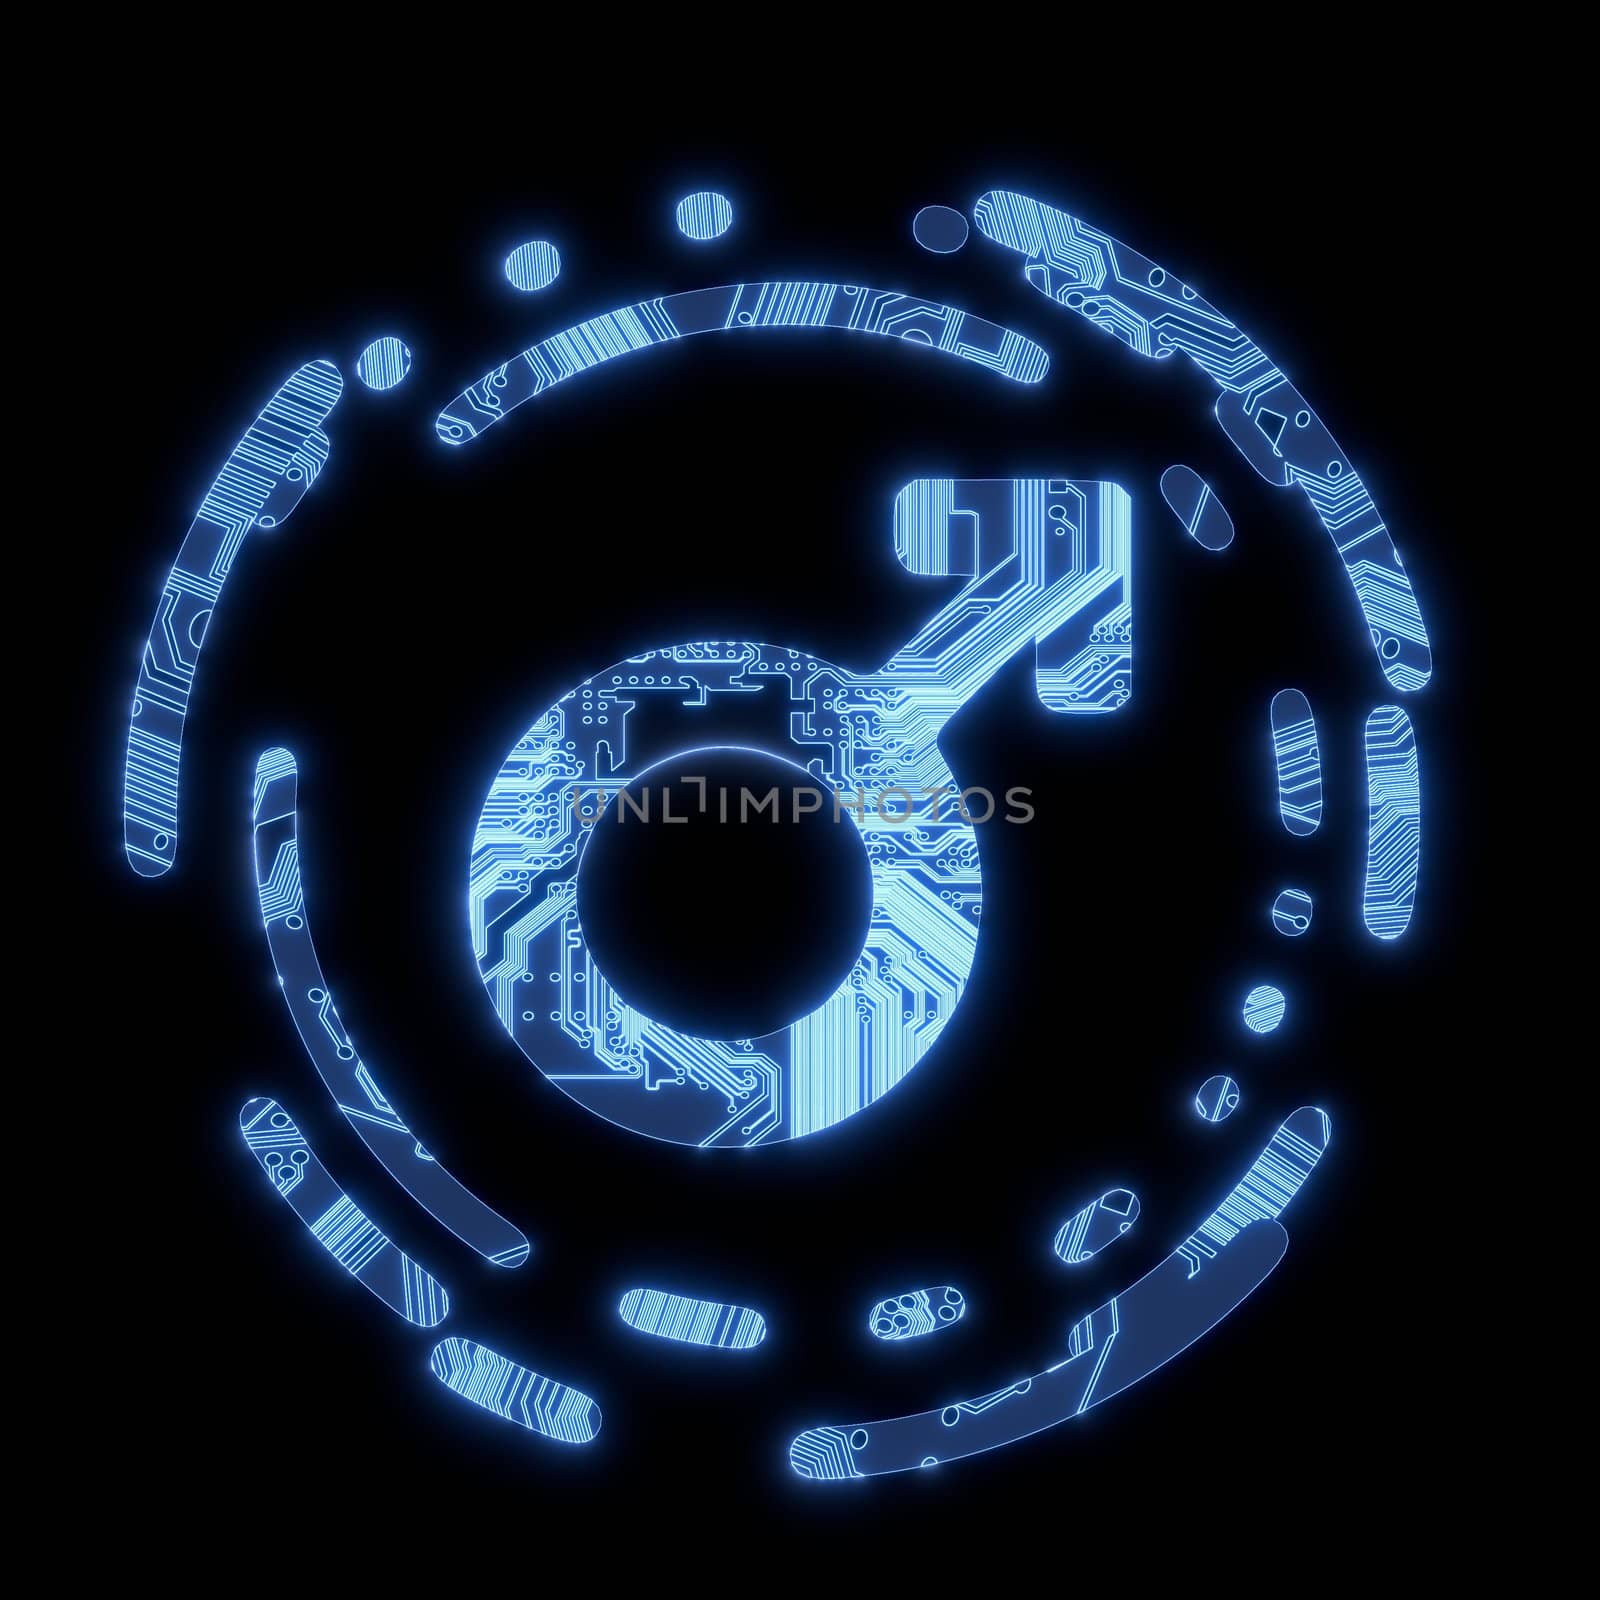 Illuminated blue electronic man symbol on a computer chip by onirb